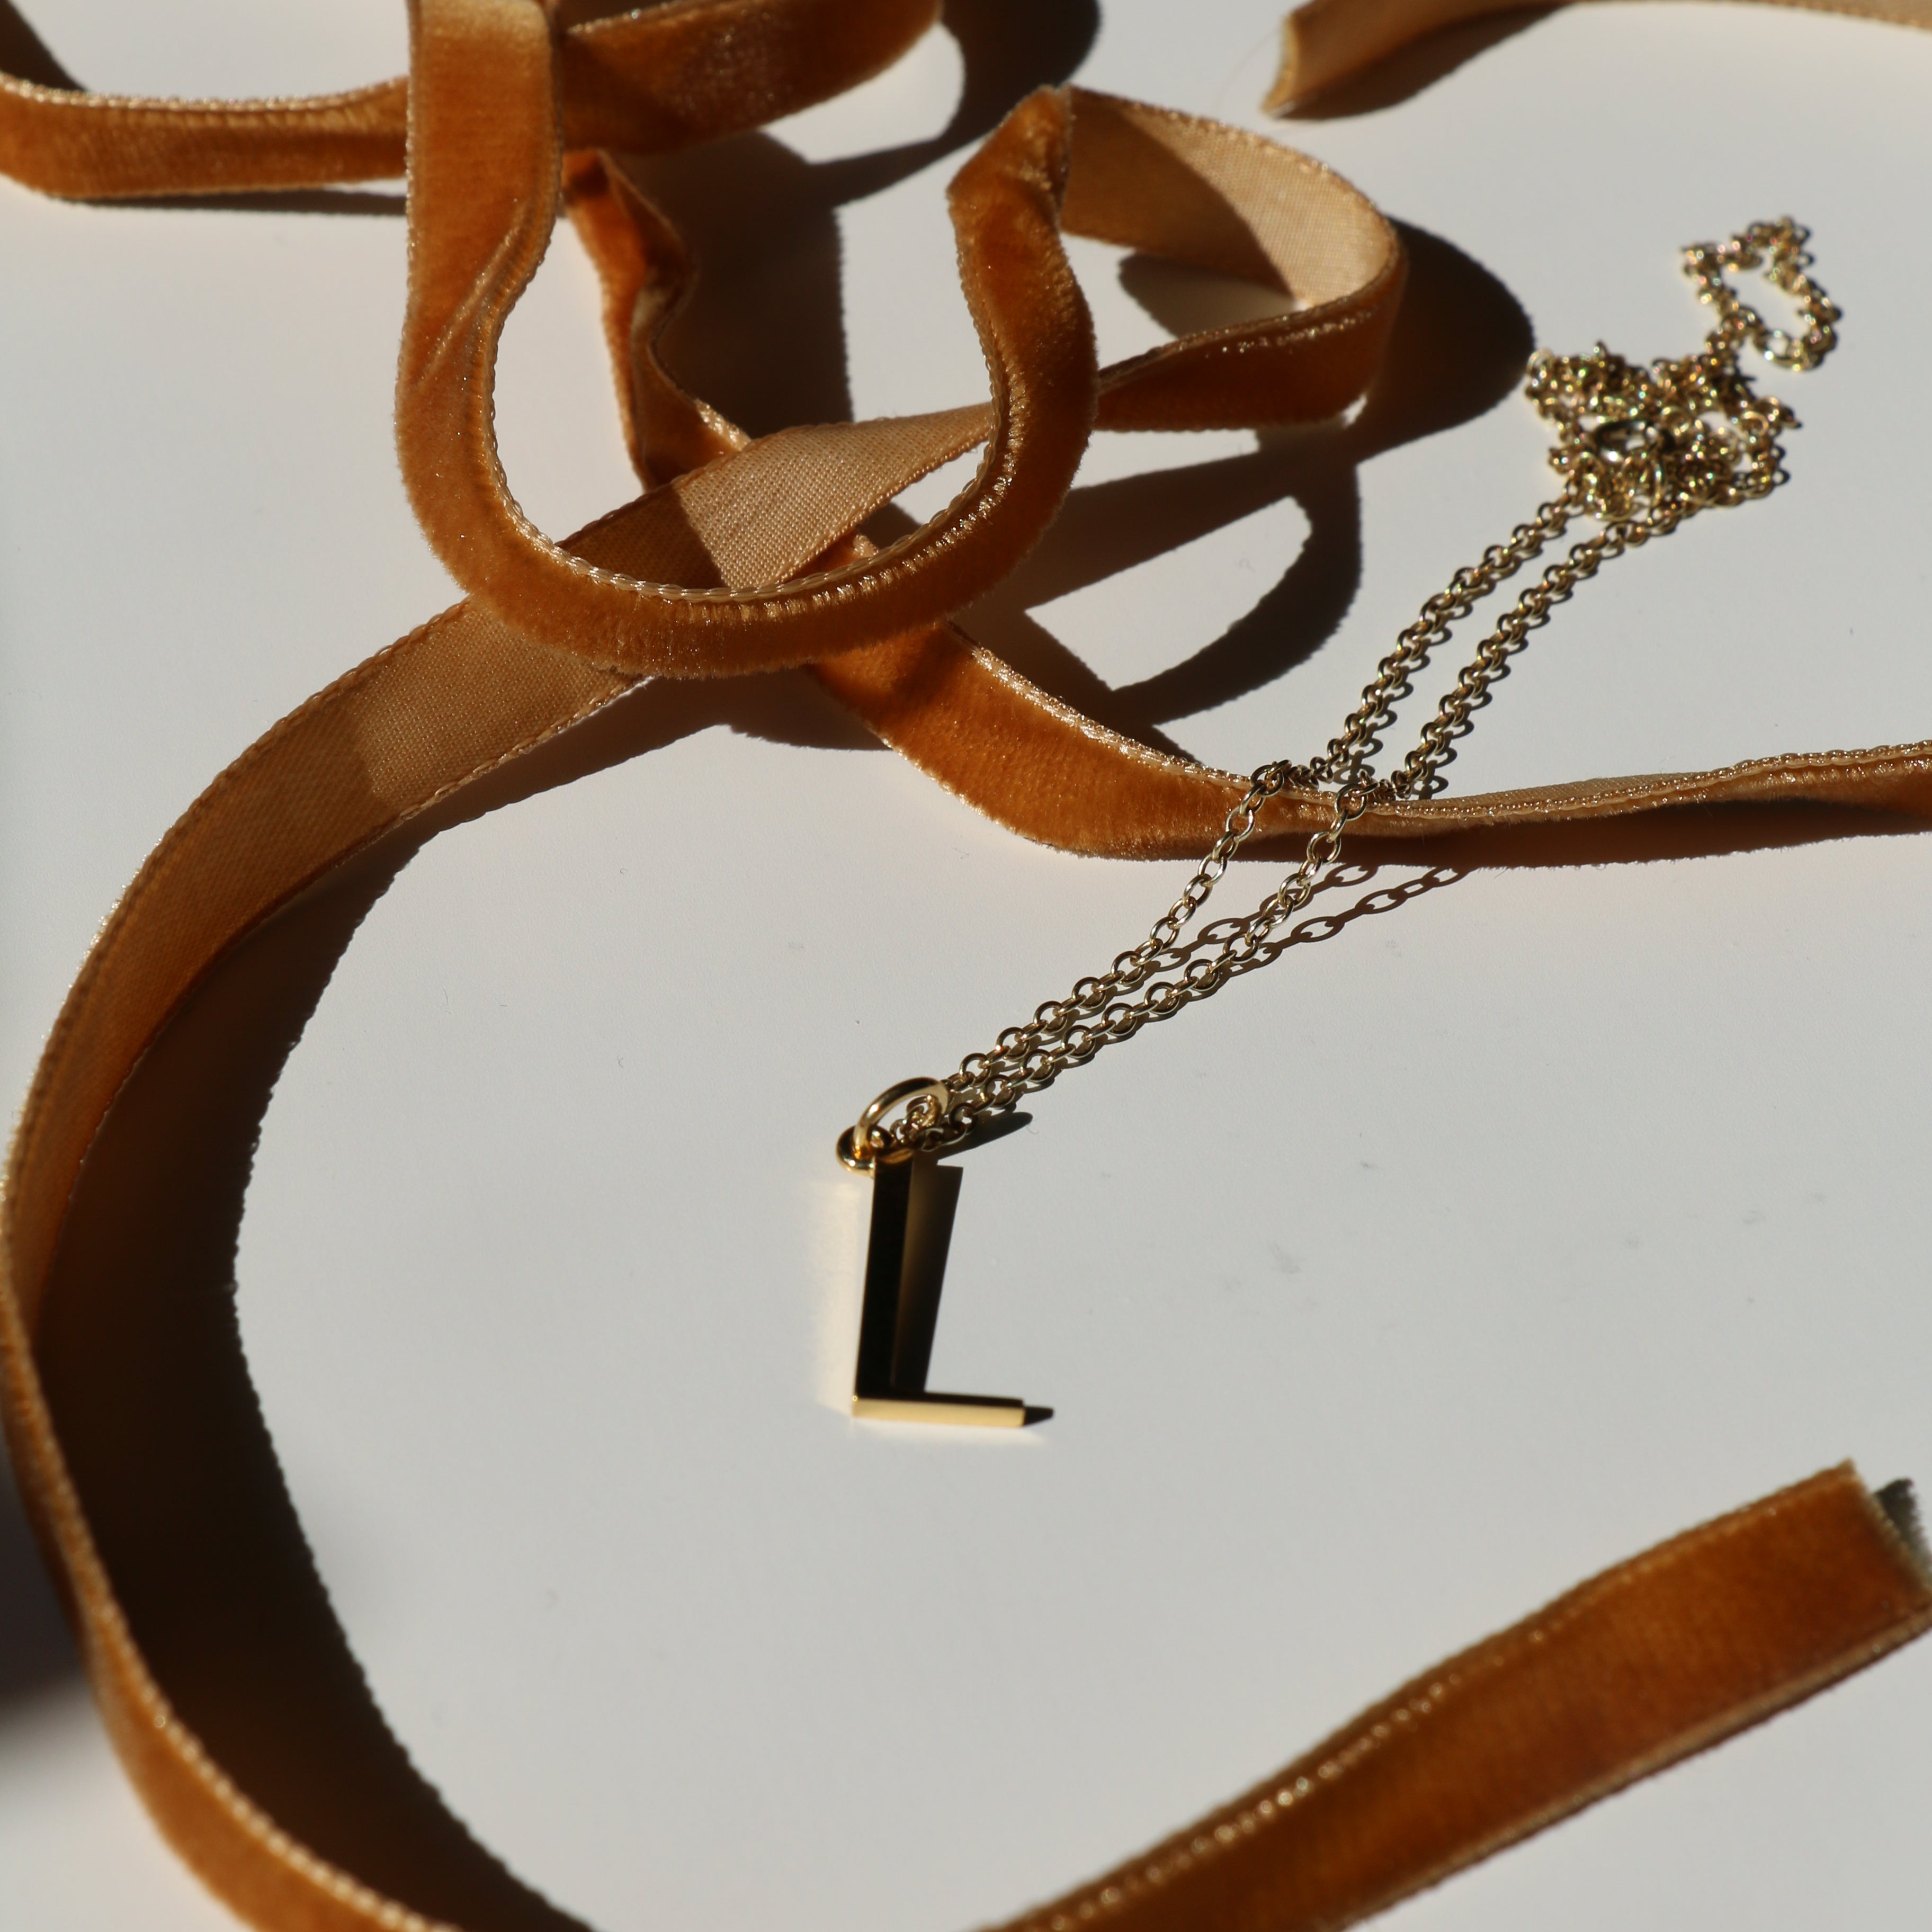 L initial necklace on a white background with shadows and mustard velvet ribbon snaking around it